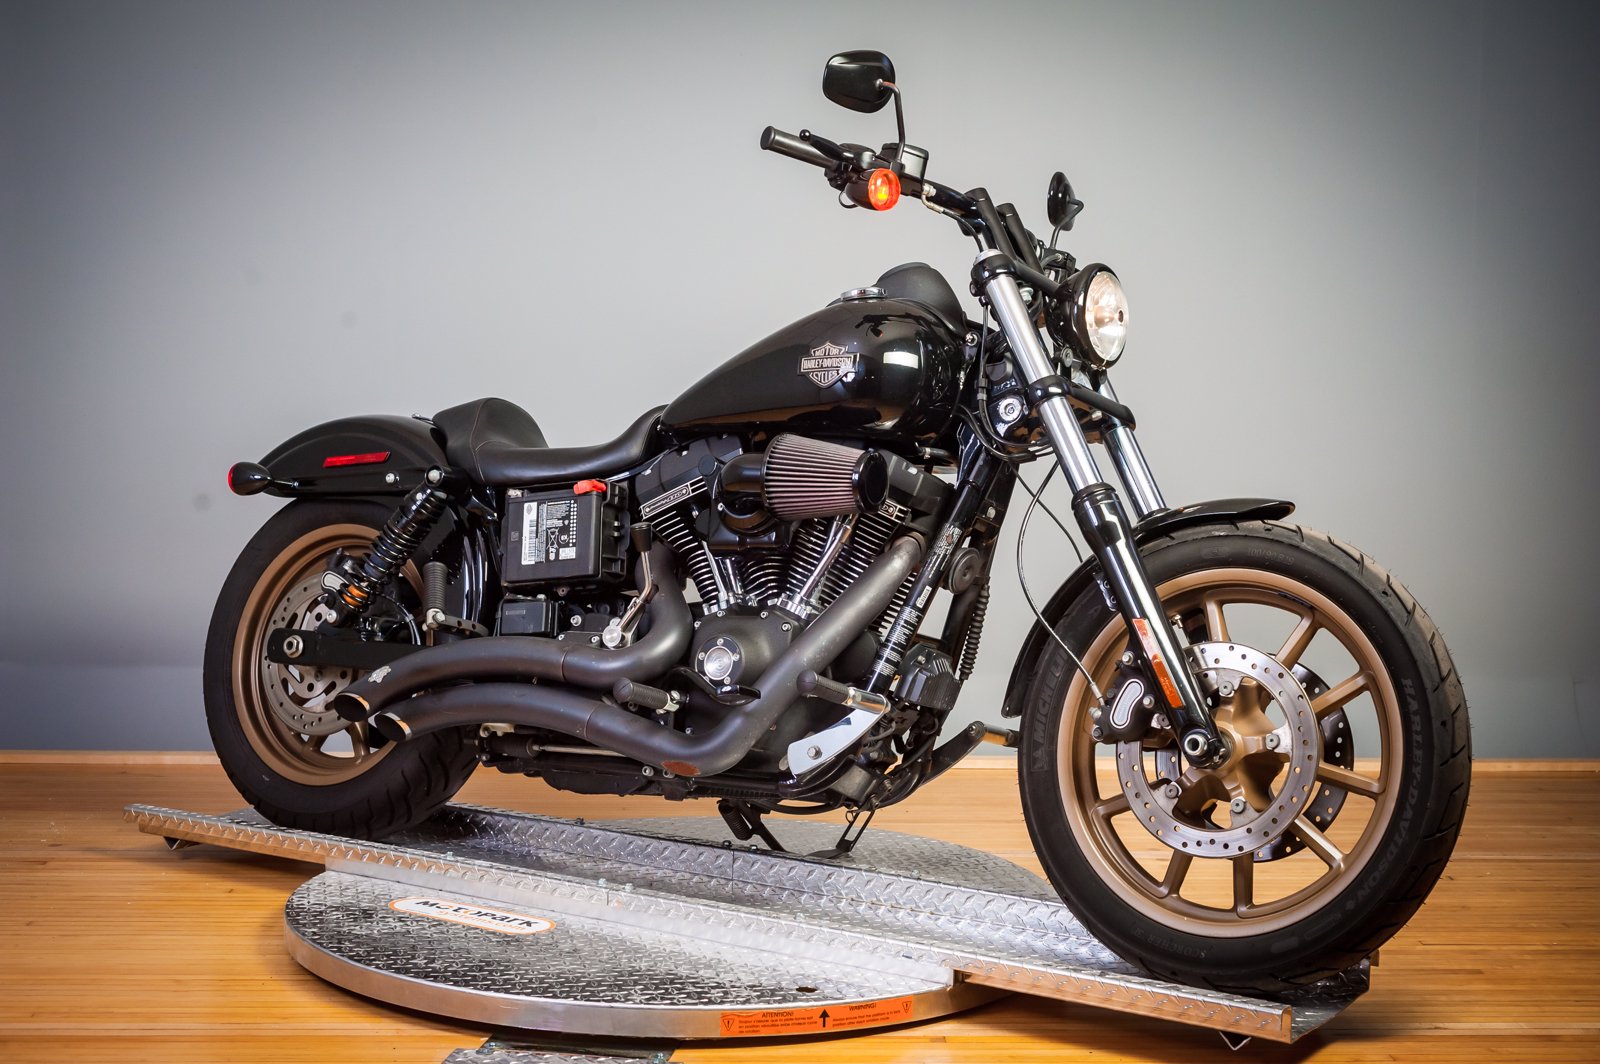 Pre-Owned 2017 Harley-Davidson Dyna Low Rider S FXDLS Softail in ...